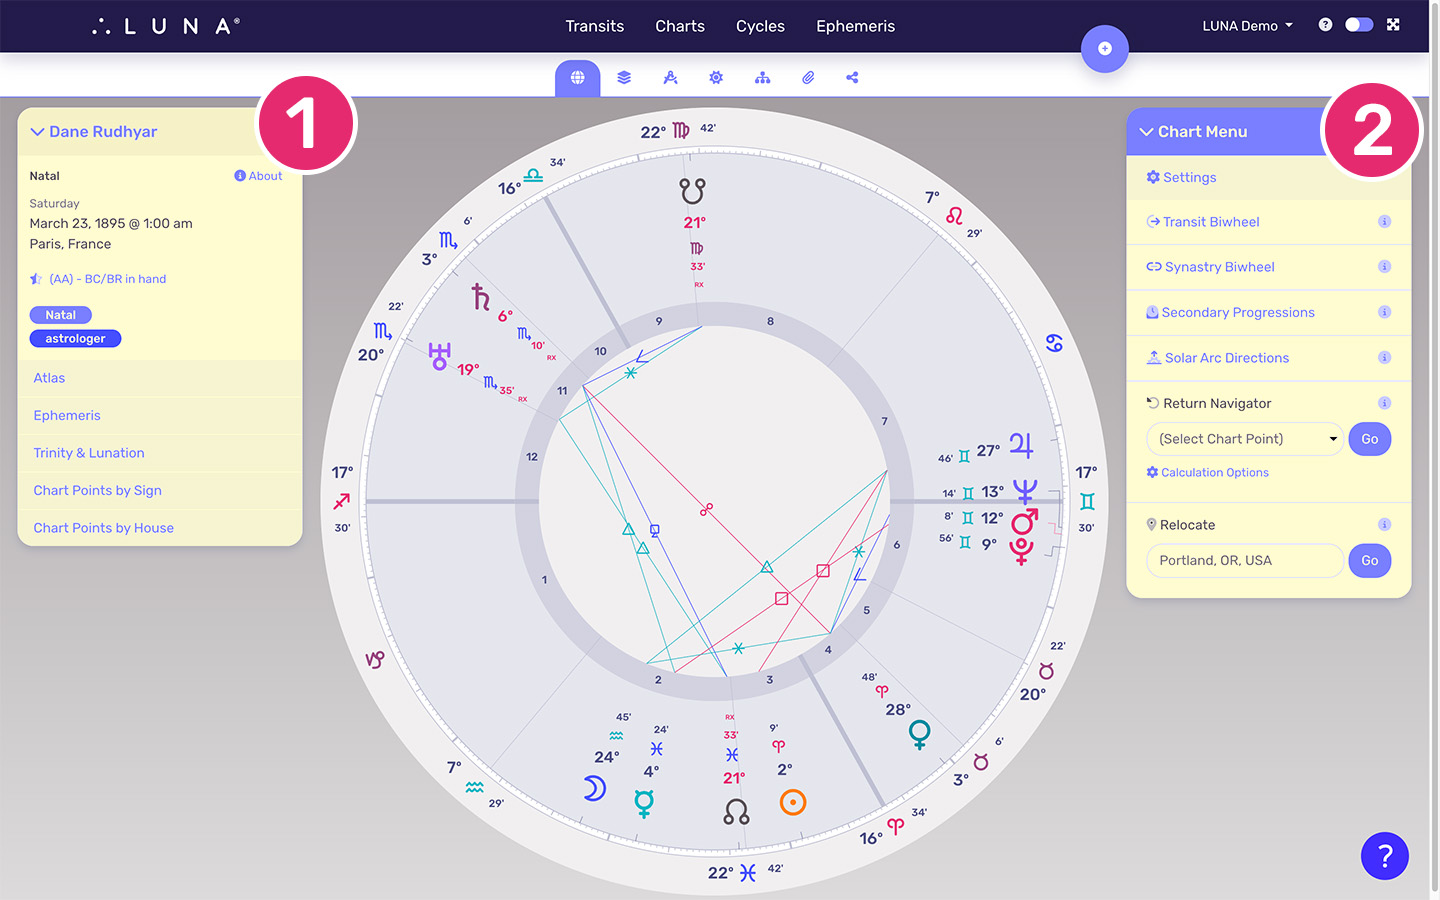 The radix chart layout has many more options in the Chart Menu.